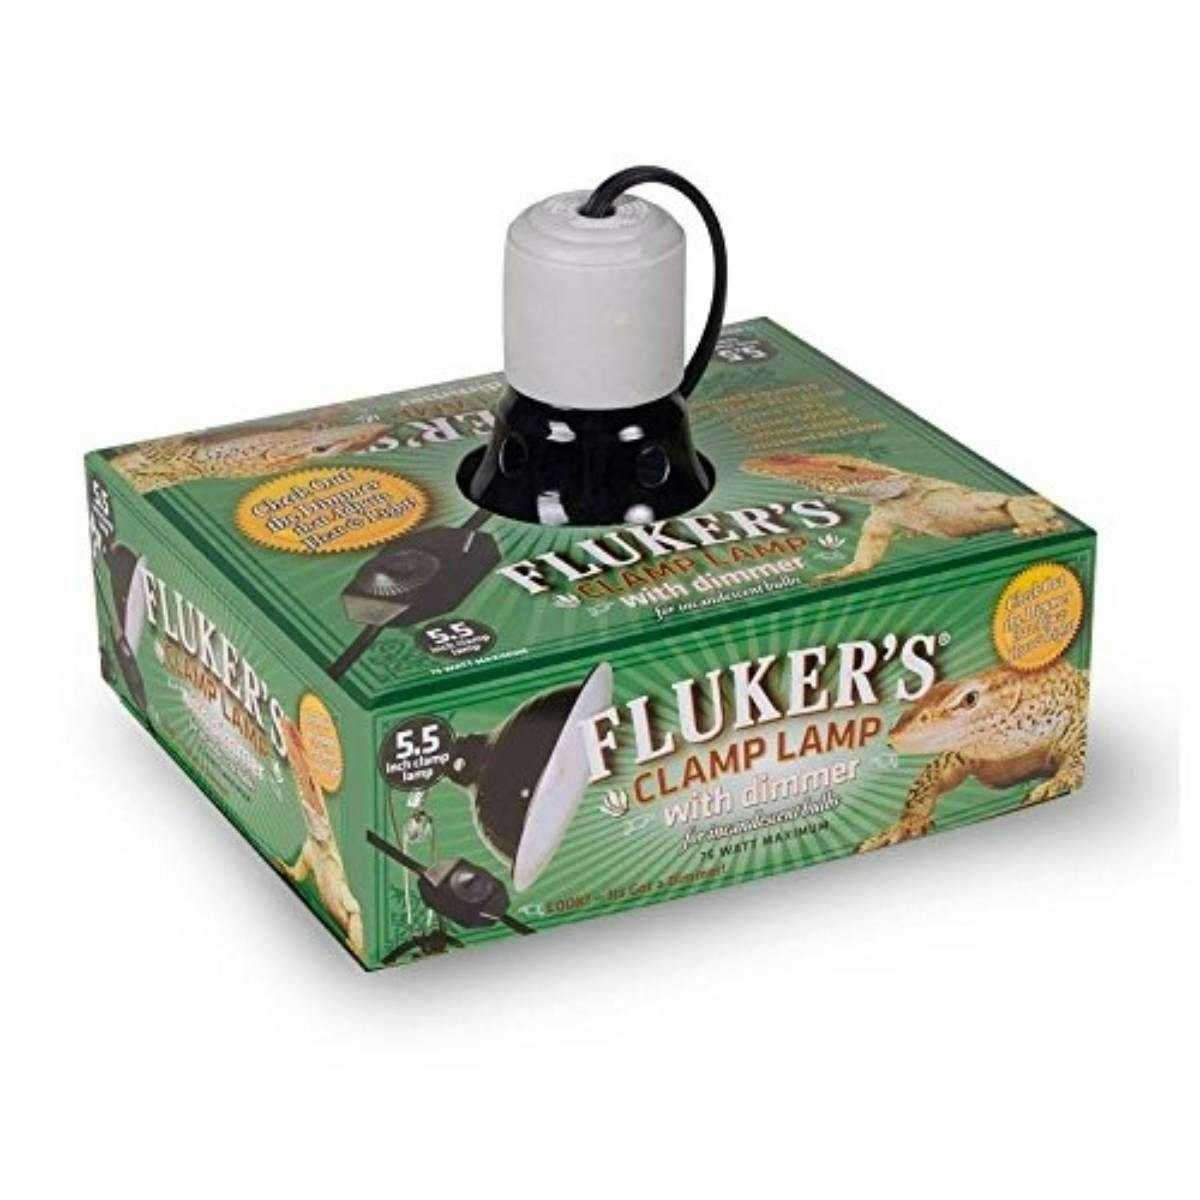 Image for Fluker's Repta-Clamp Lamp with Dimmable Switch (5.5") by Josh's Frogs